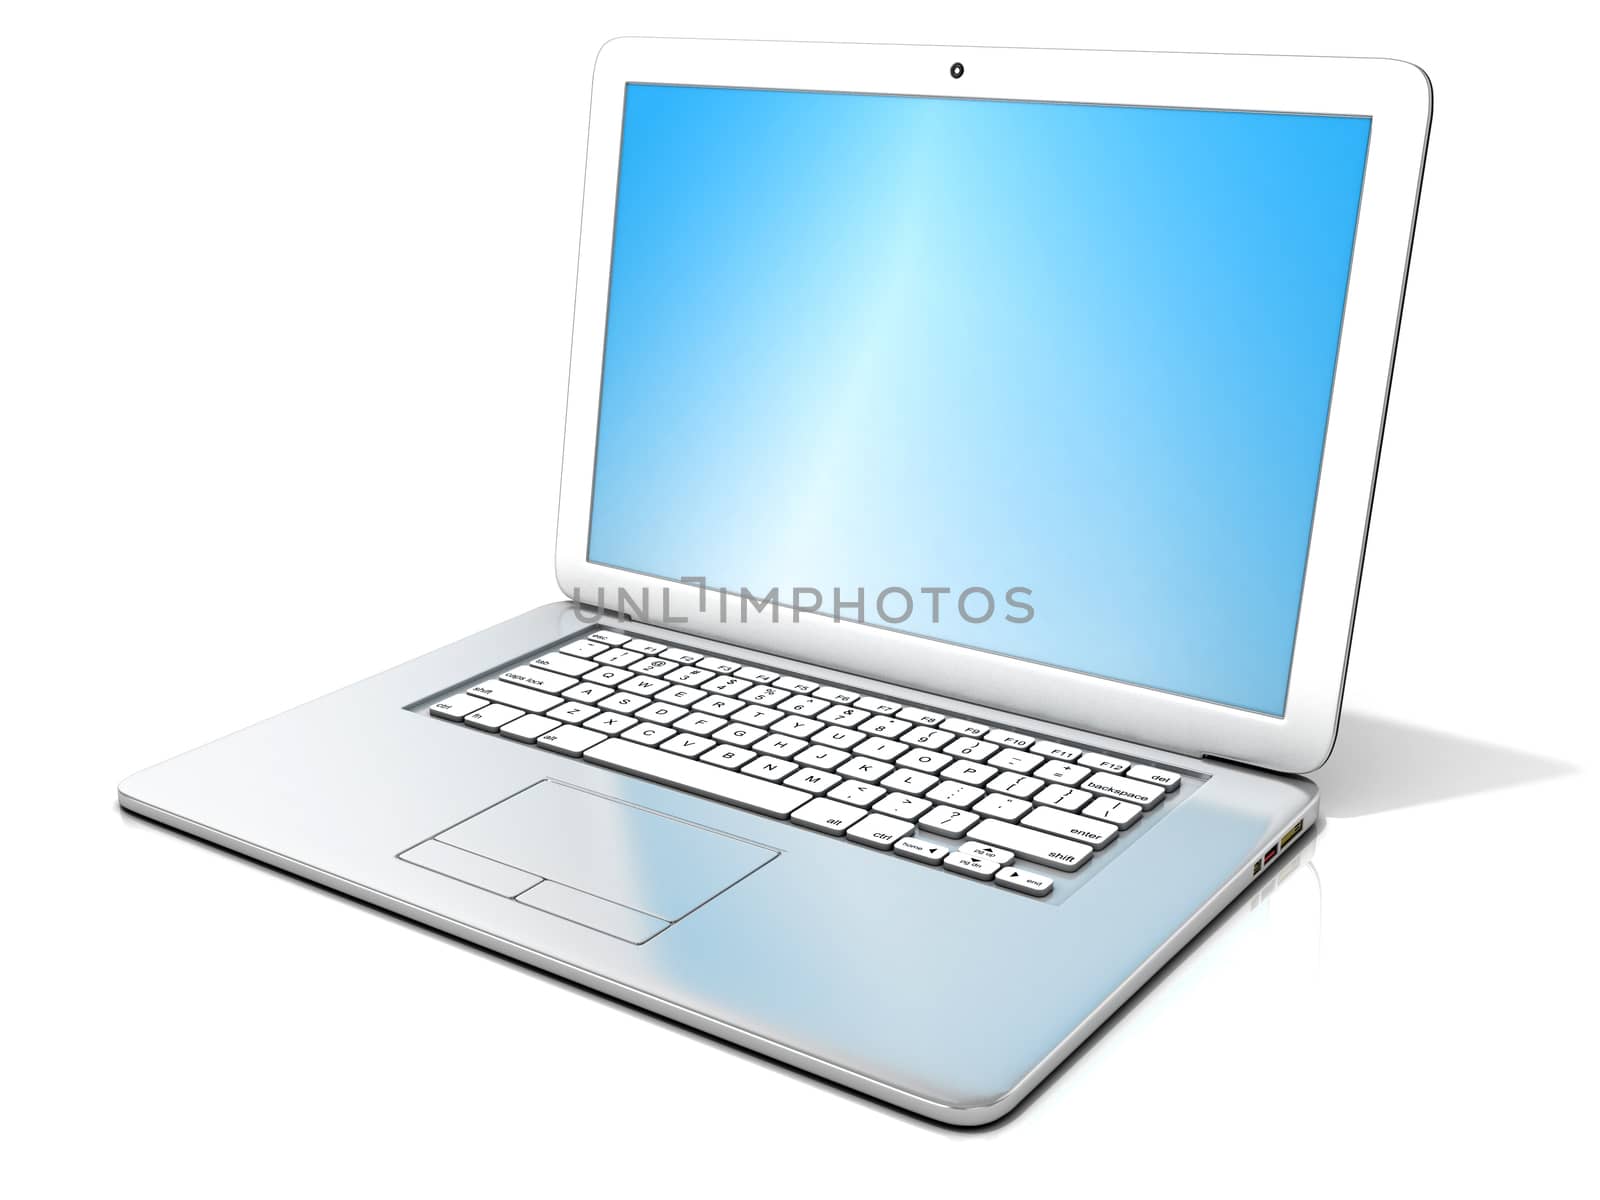 3D rendering of a open silver laptop with blue screen, isolated on white background